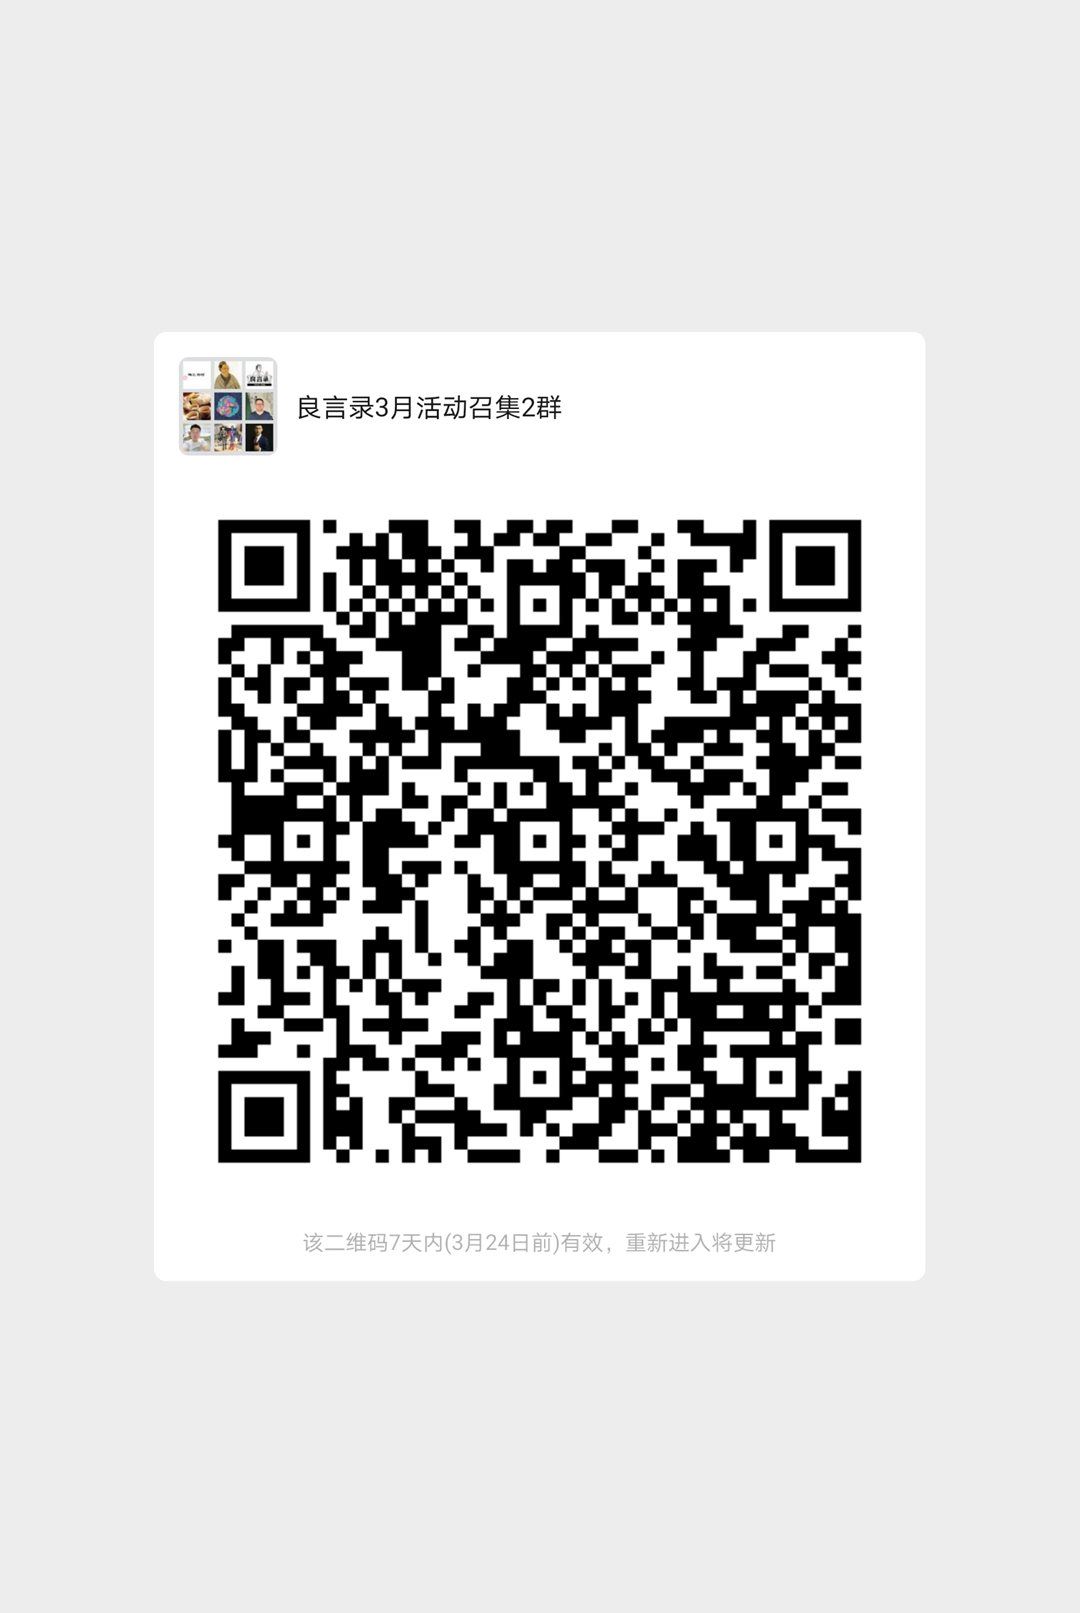 mmqrcode1615939728352.png